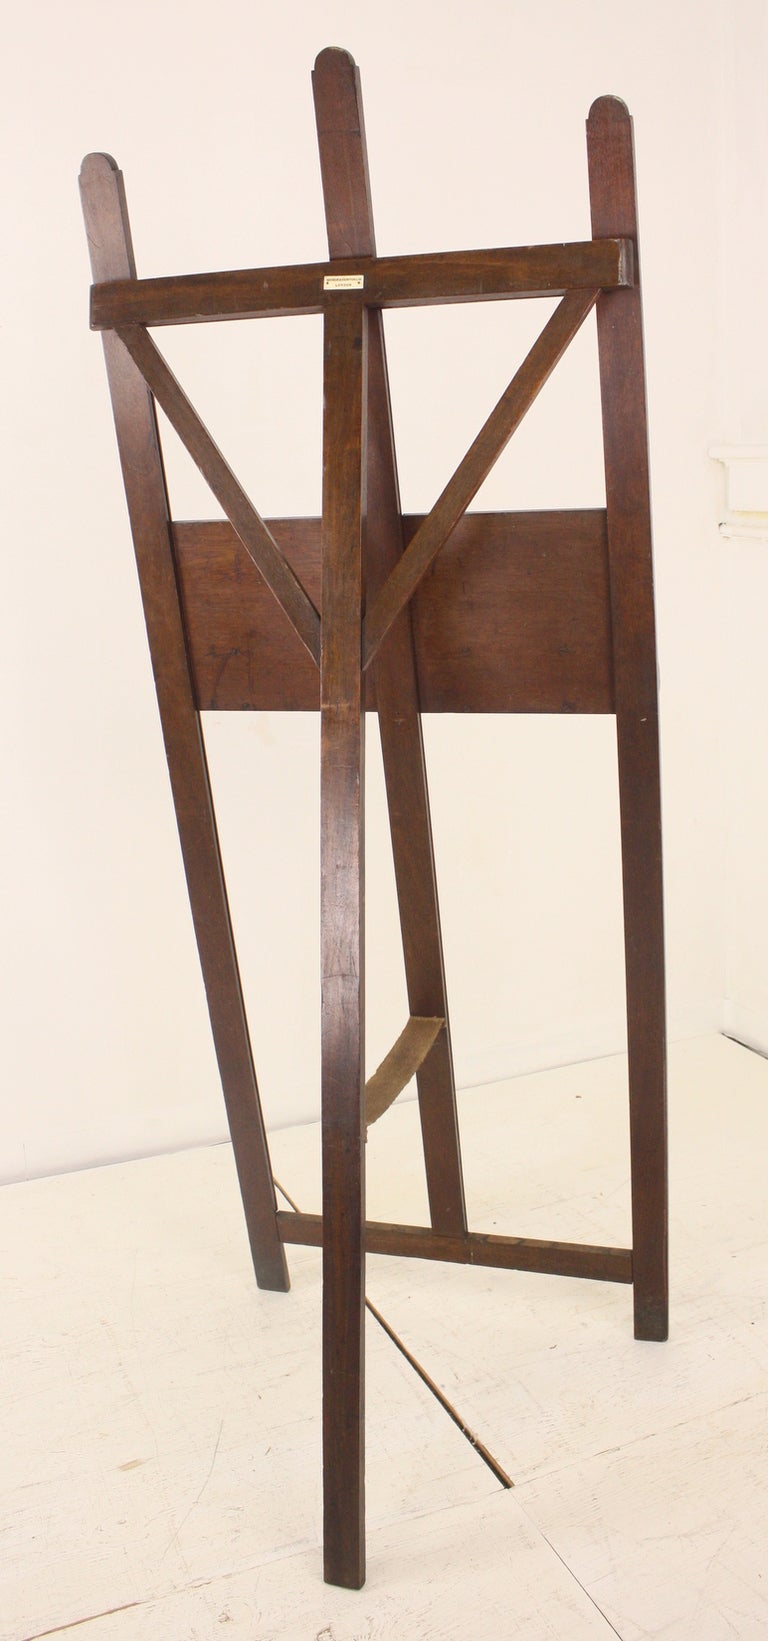 Large 19th C. Campaign Easel, London, England 1